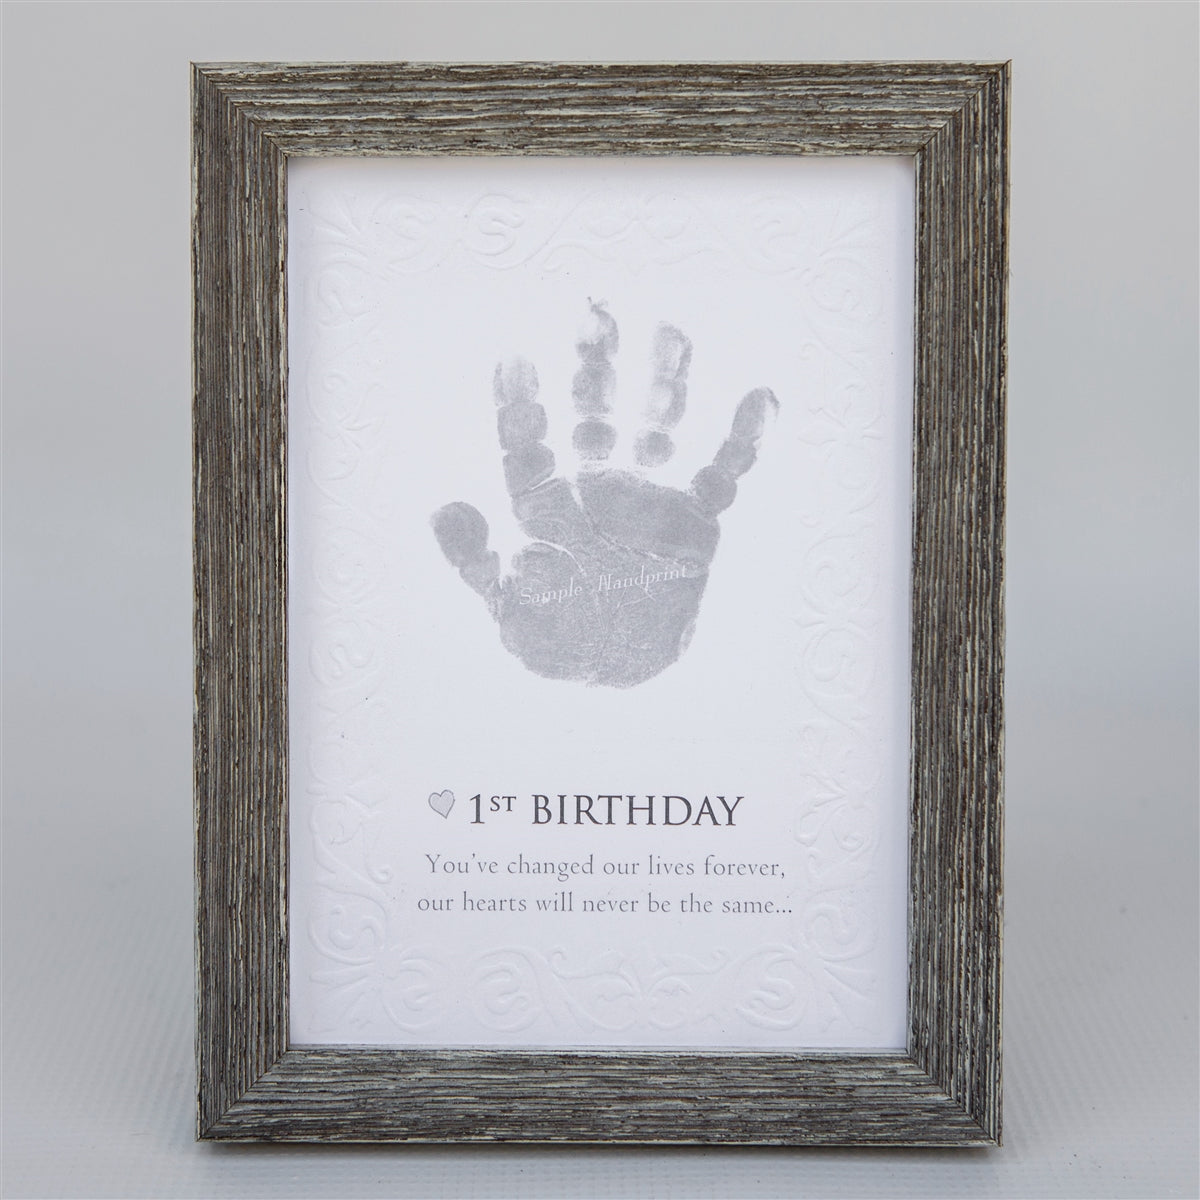 5x7 farmhouse frame with "1st Birthday" sentiment on embossed cardstock with space for a child's handprint.